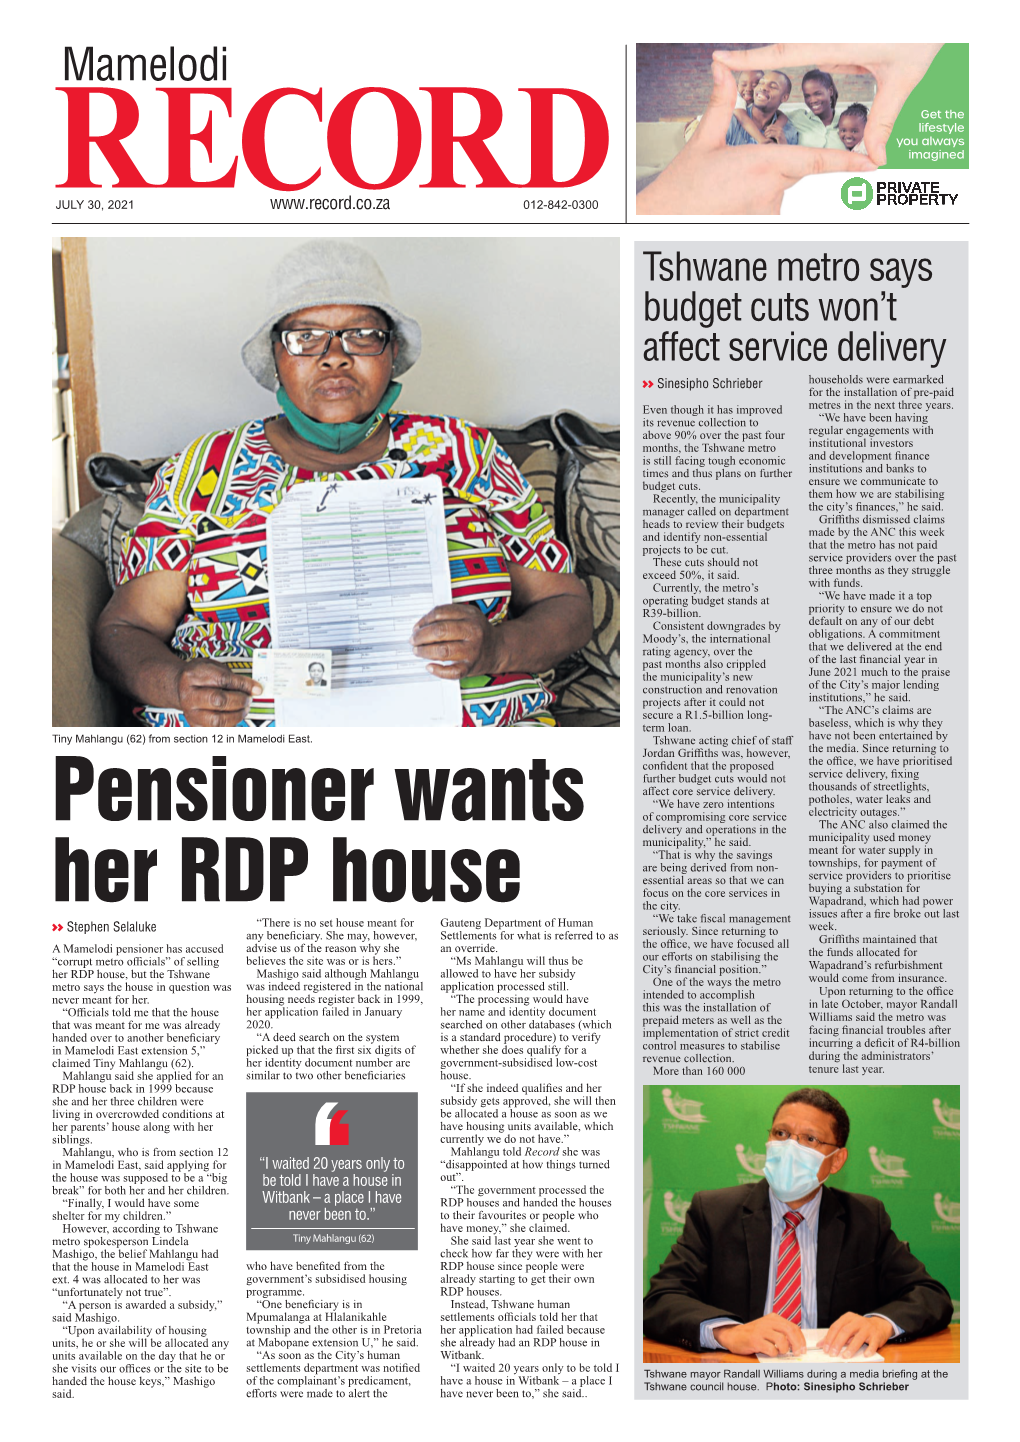 Pensioner Wants Her RDP House